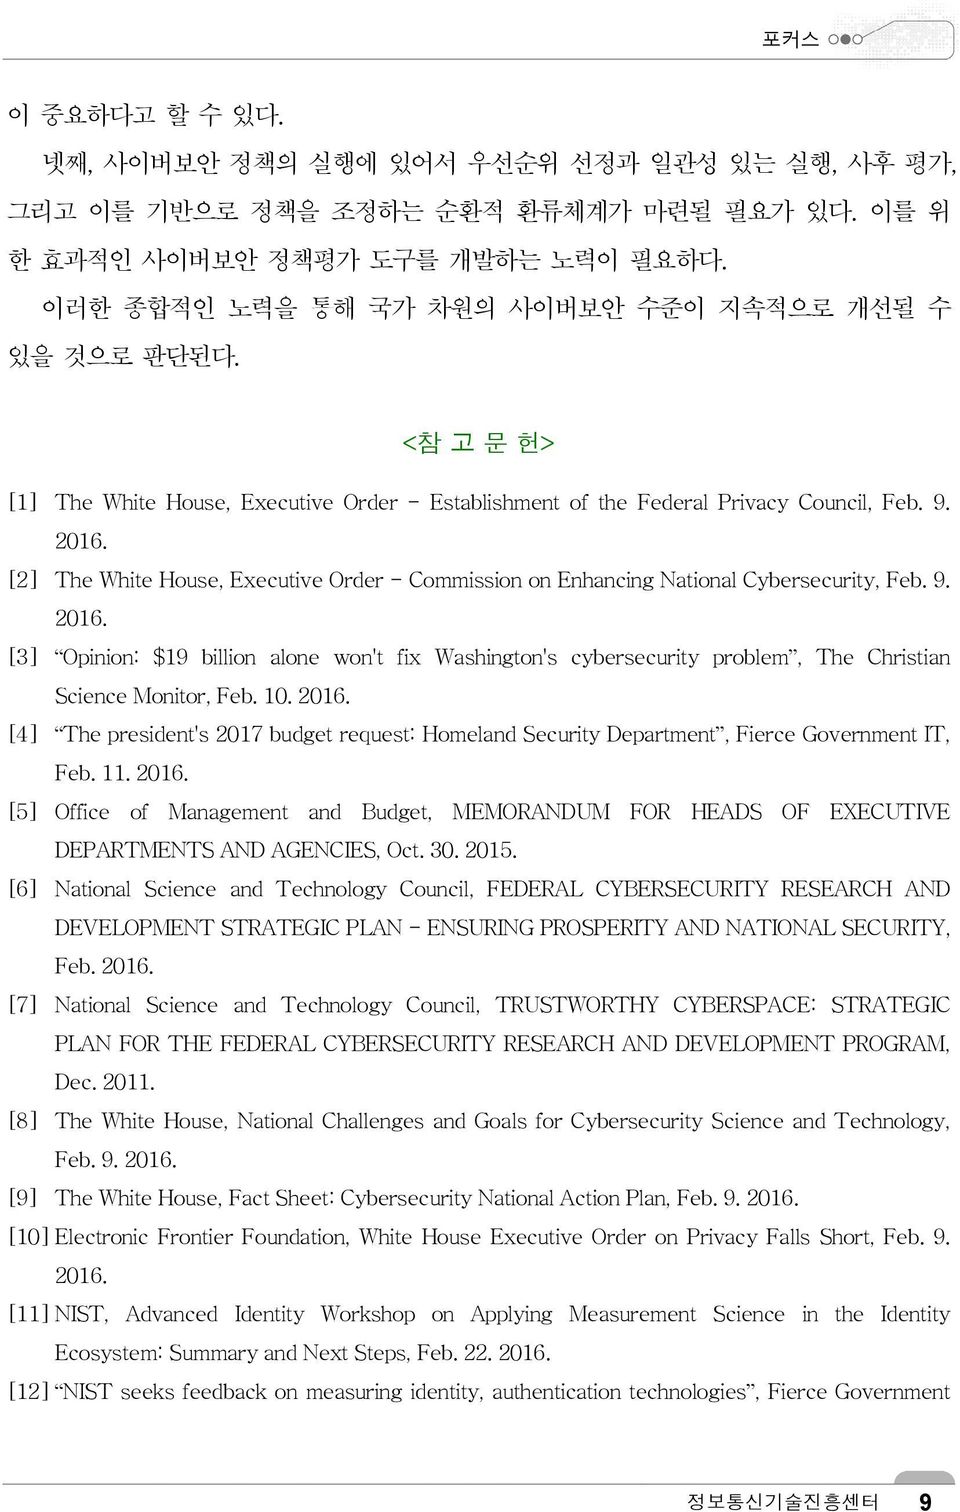 [2] The White House, Executive Order - Commission on Enhancing National Cybersecurity, Feb. 9. 2016.